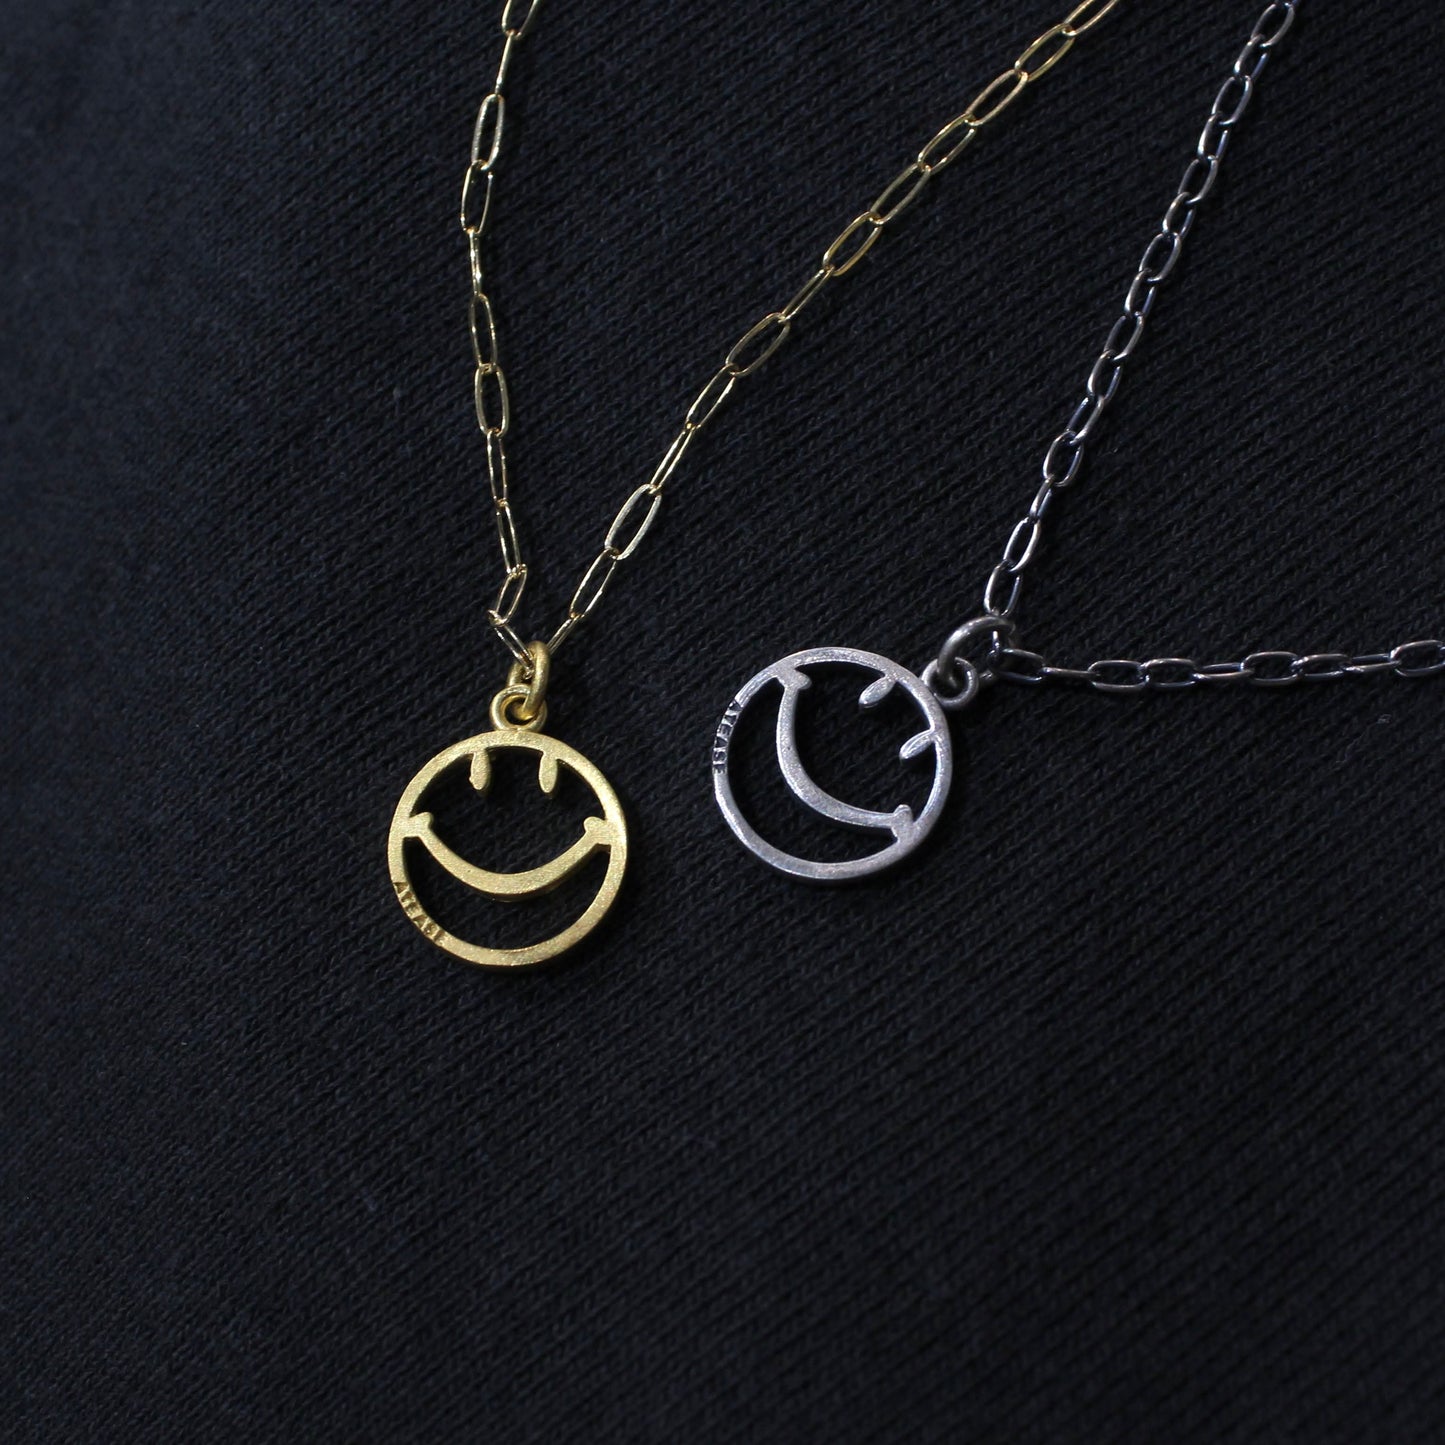 Atease - SMILE OPEN WORK NECKLACE